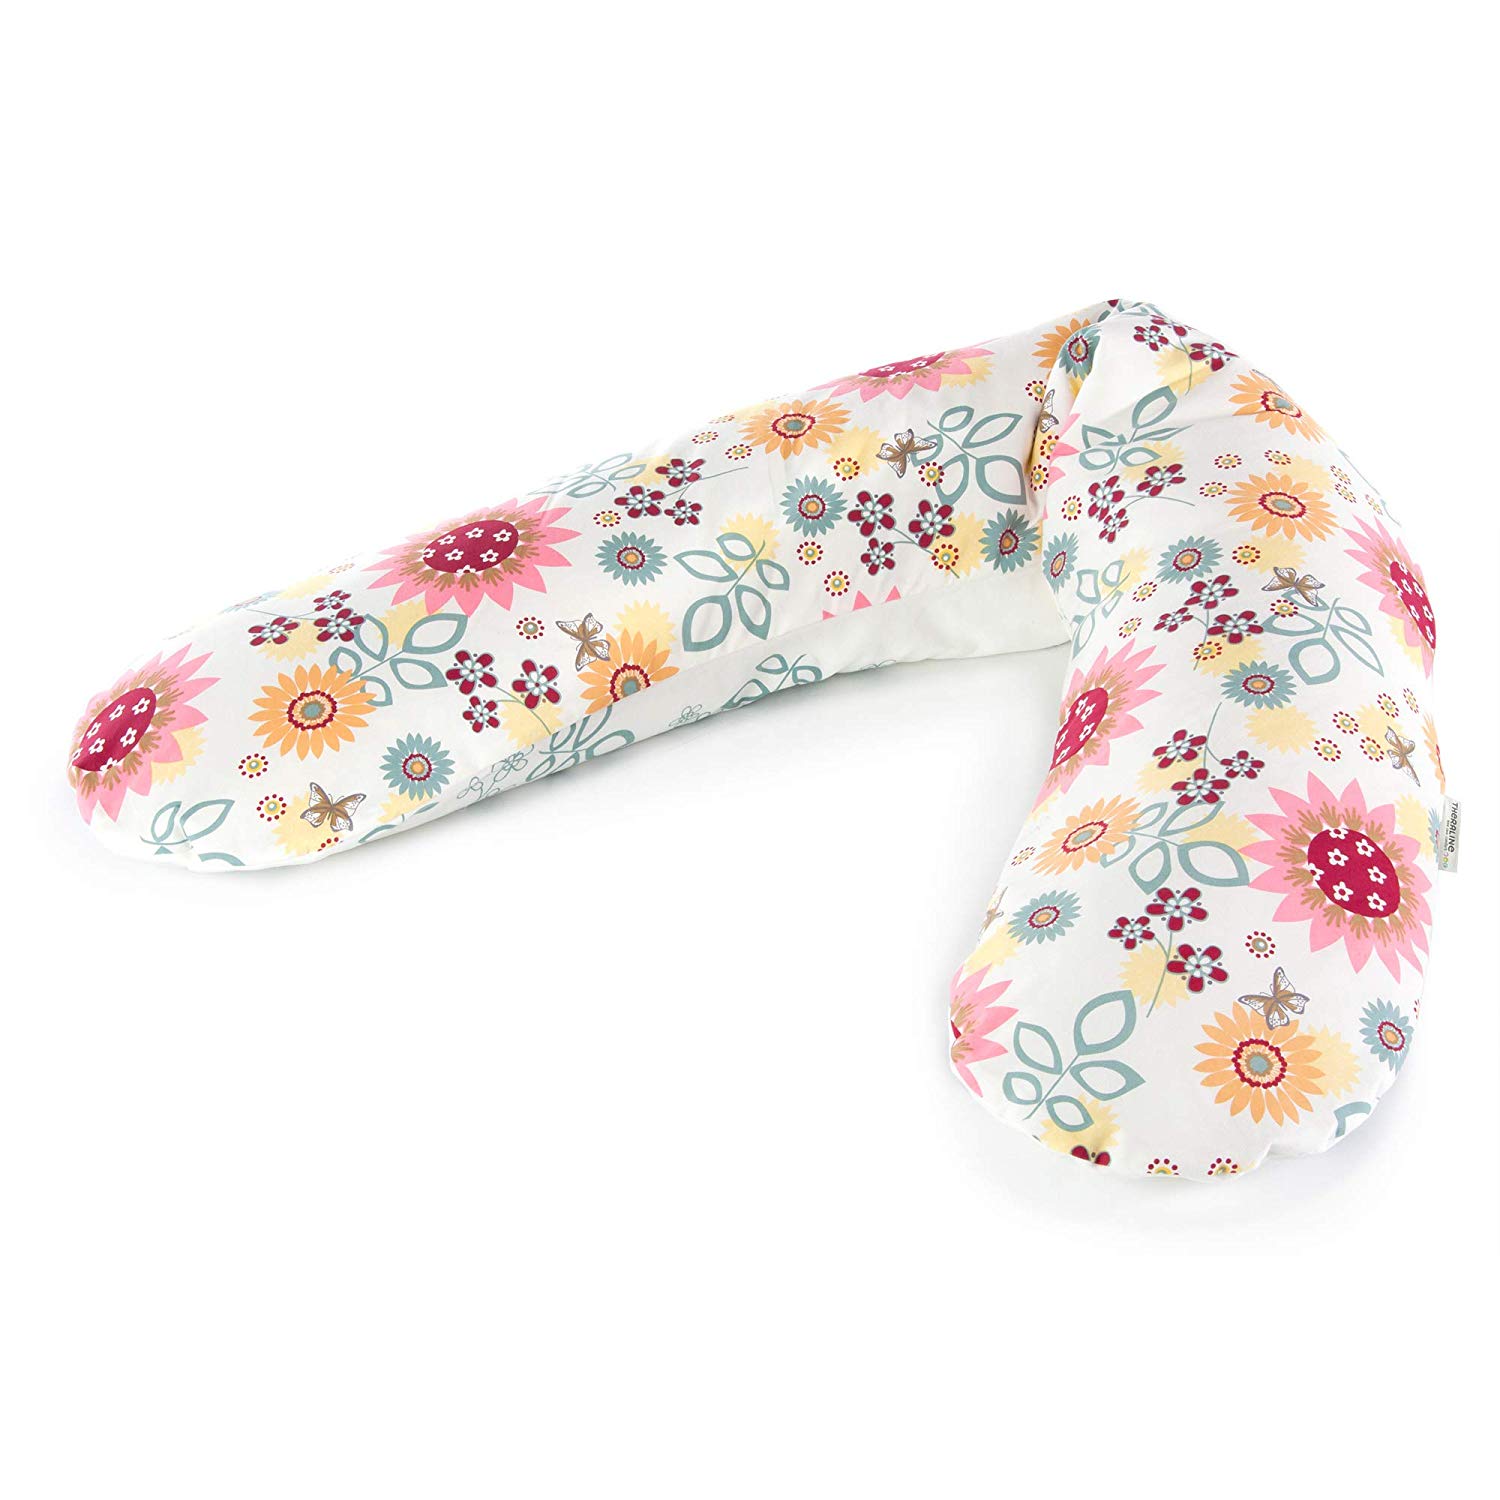 Theraline Nursing Pillow The Original 190 cm with Cover Summer Flowers